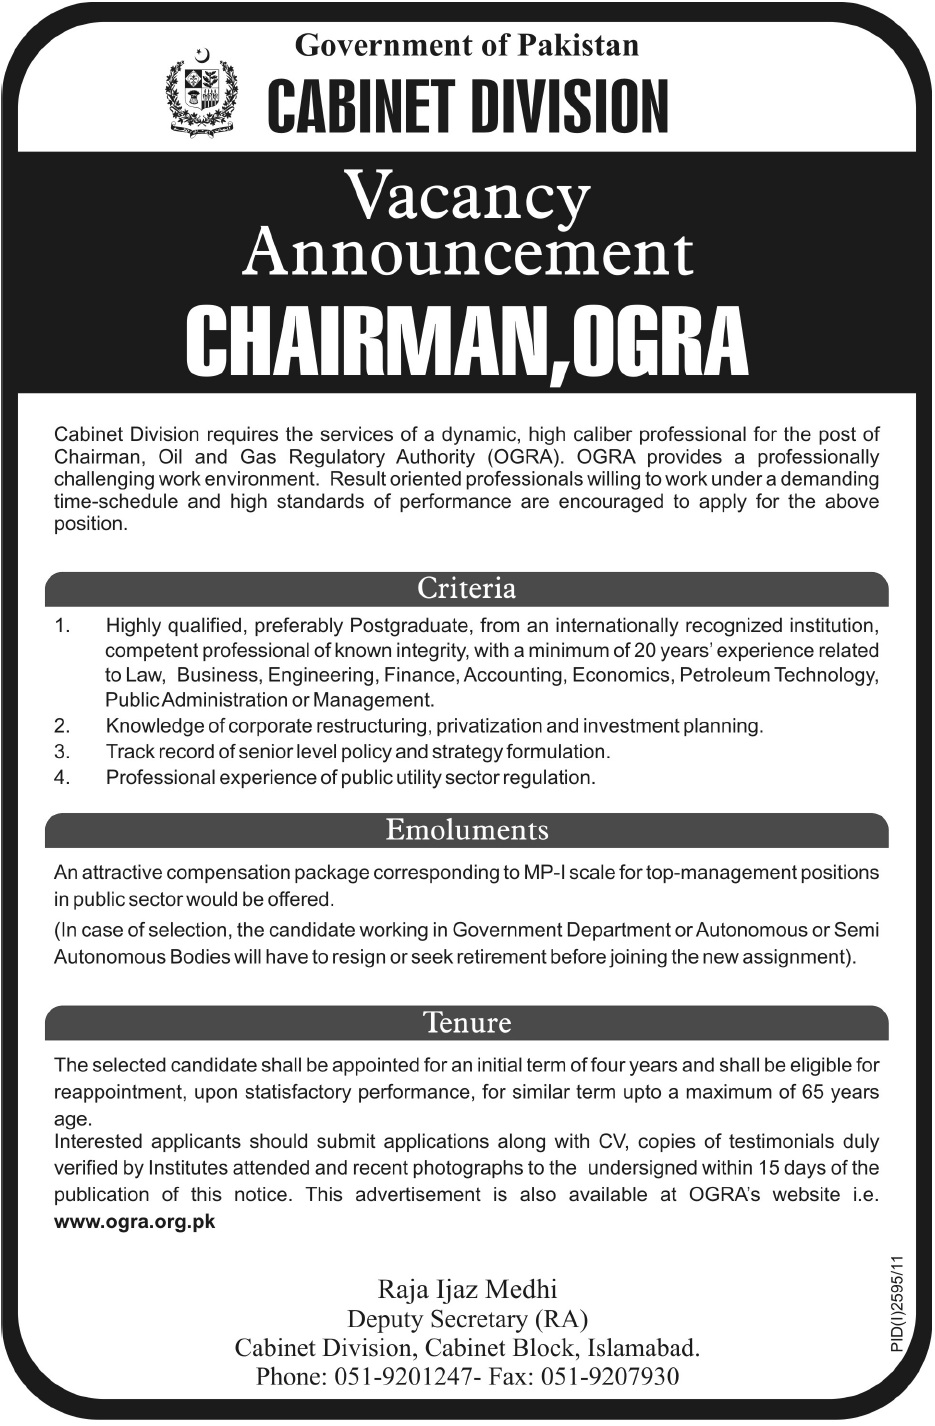 Cabinet Division Required the Services of Chairman OGRA